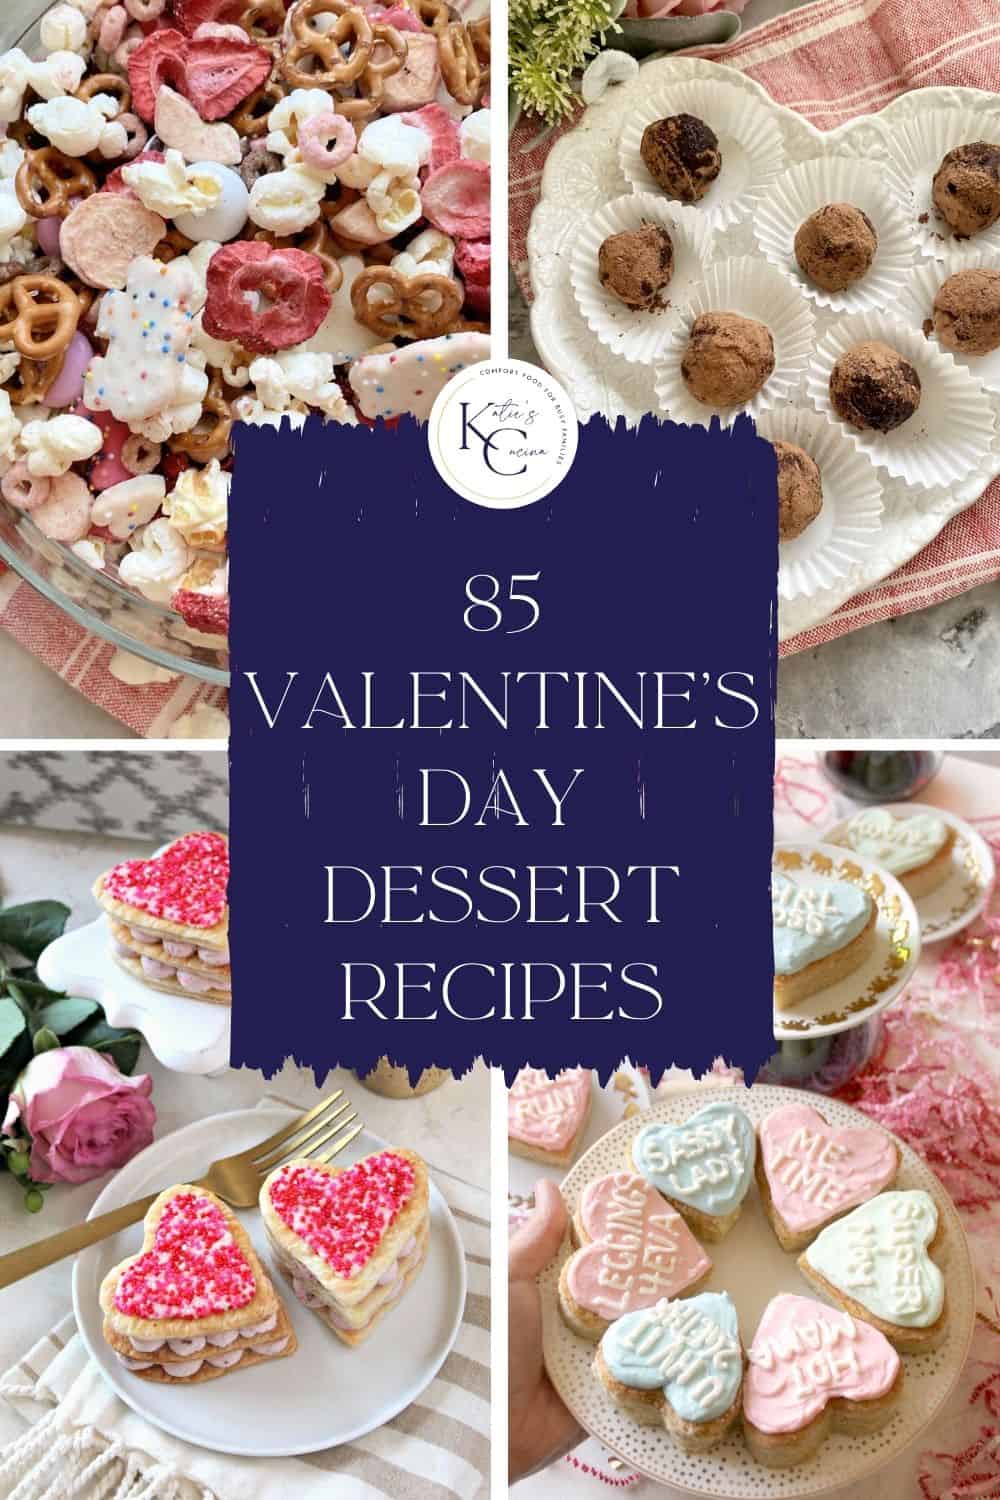 Four photo collage of pink and white heart shaped desserts with text on image for Pinterest.